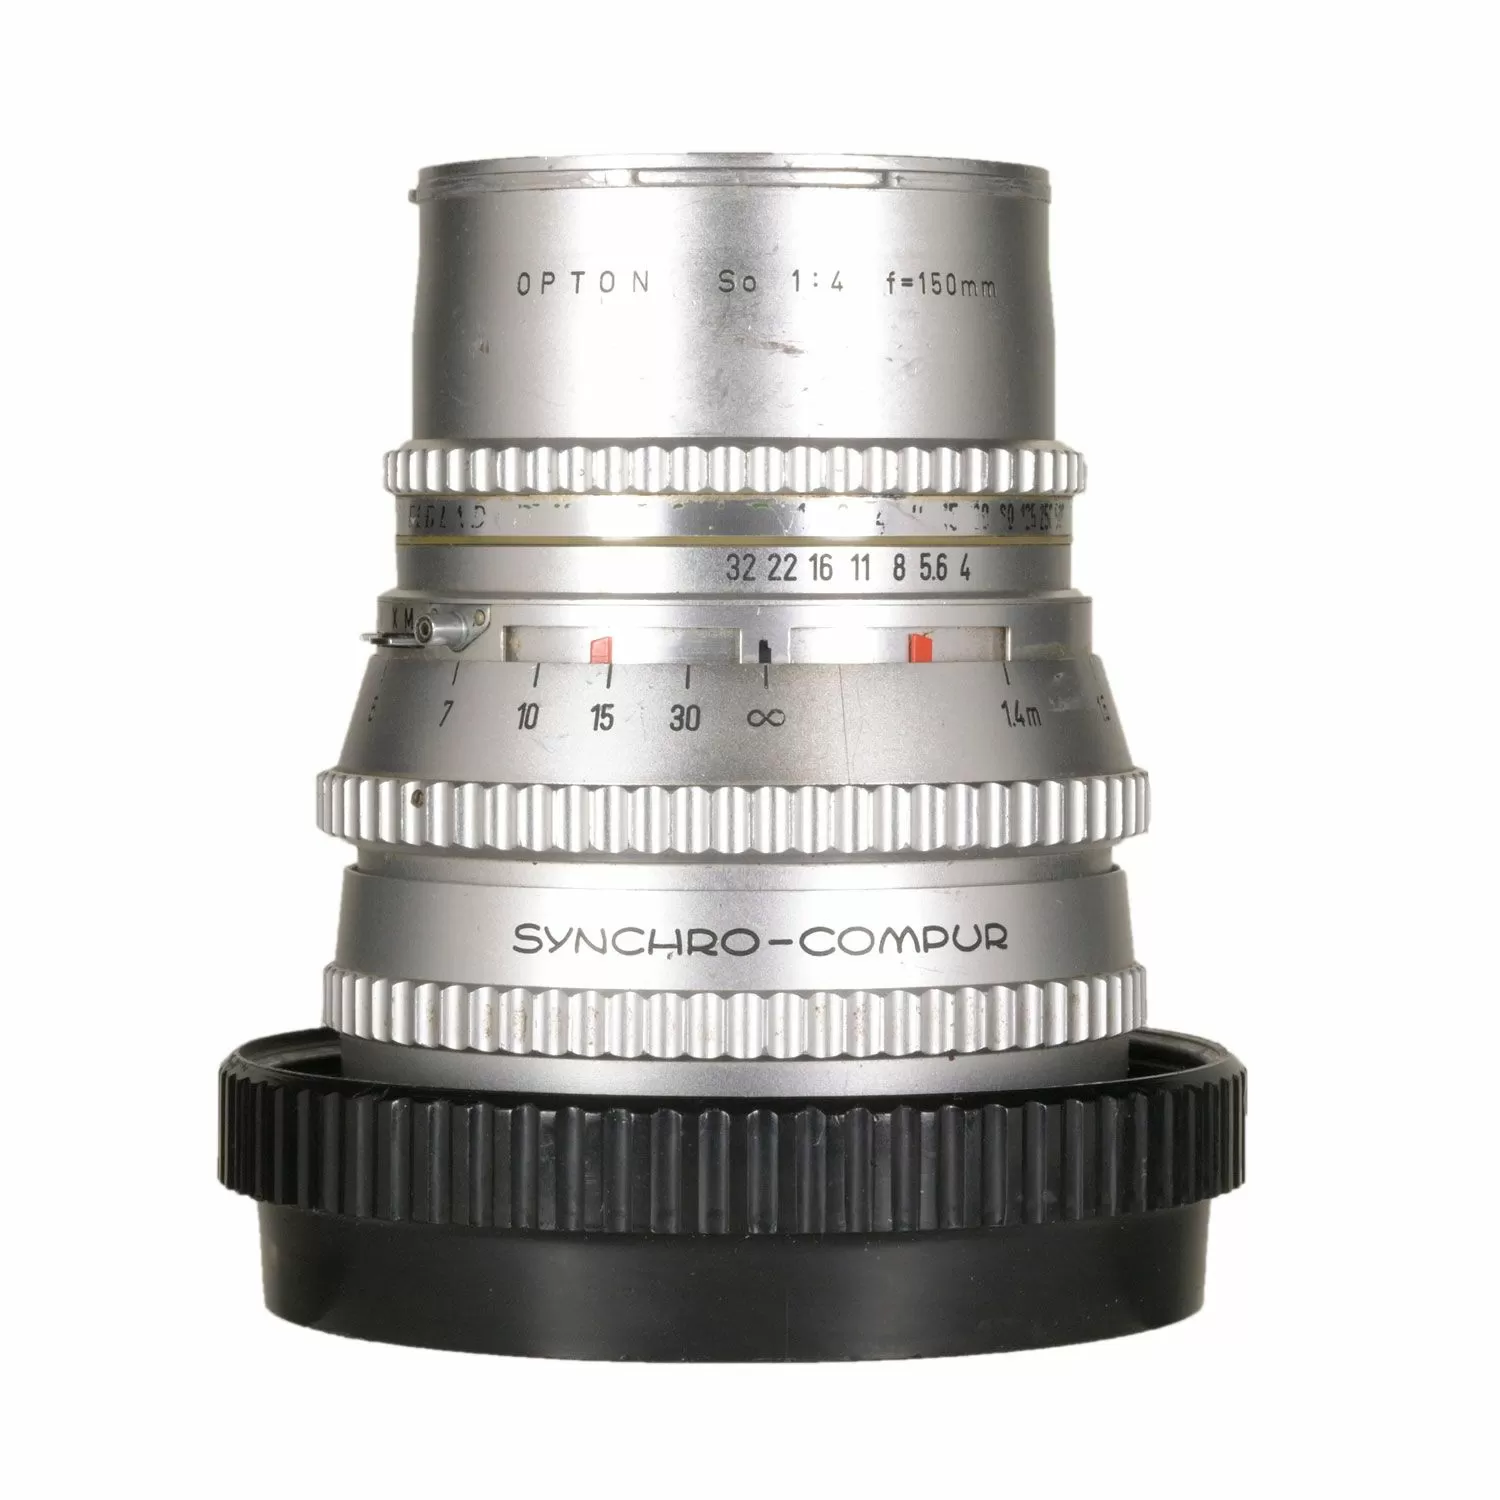 Carl Zeiss Opton 150mm f/4  Synchro-Compur  Hasselblad V б/у